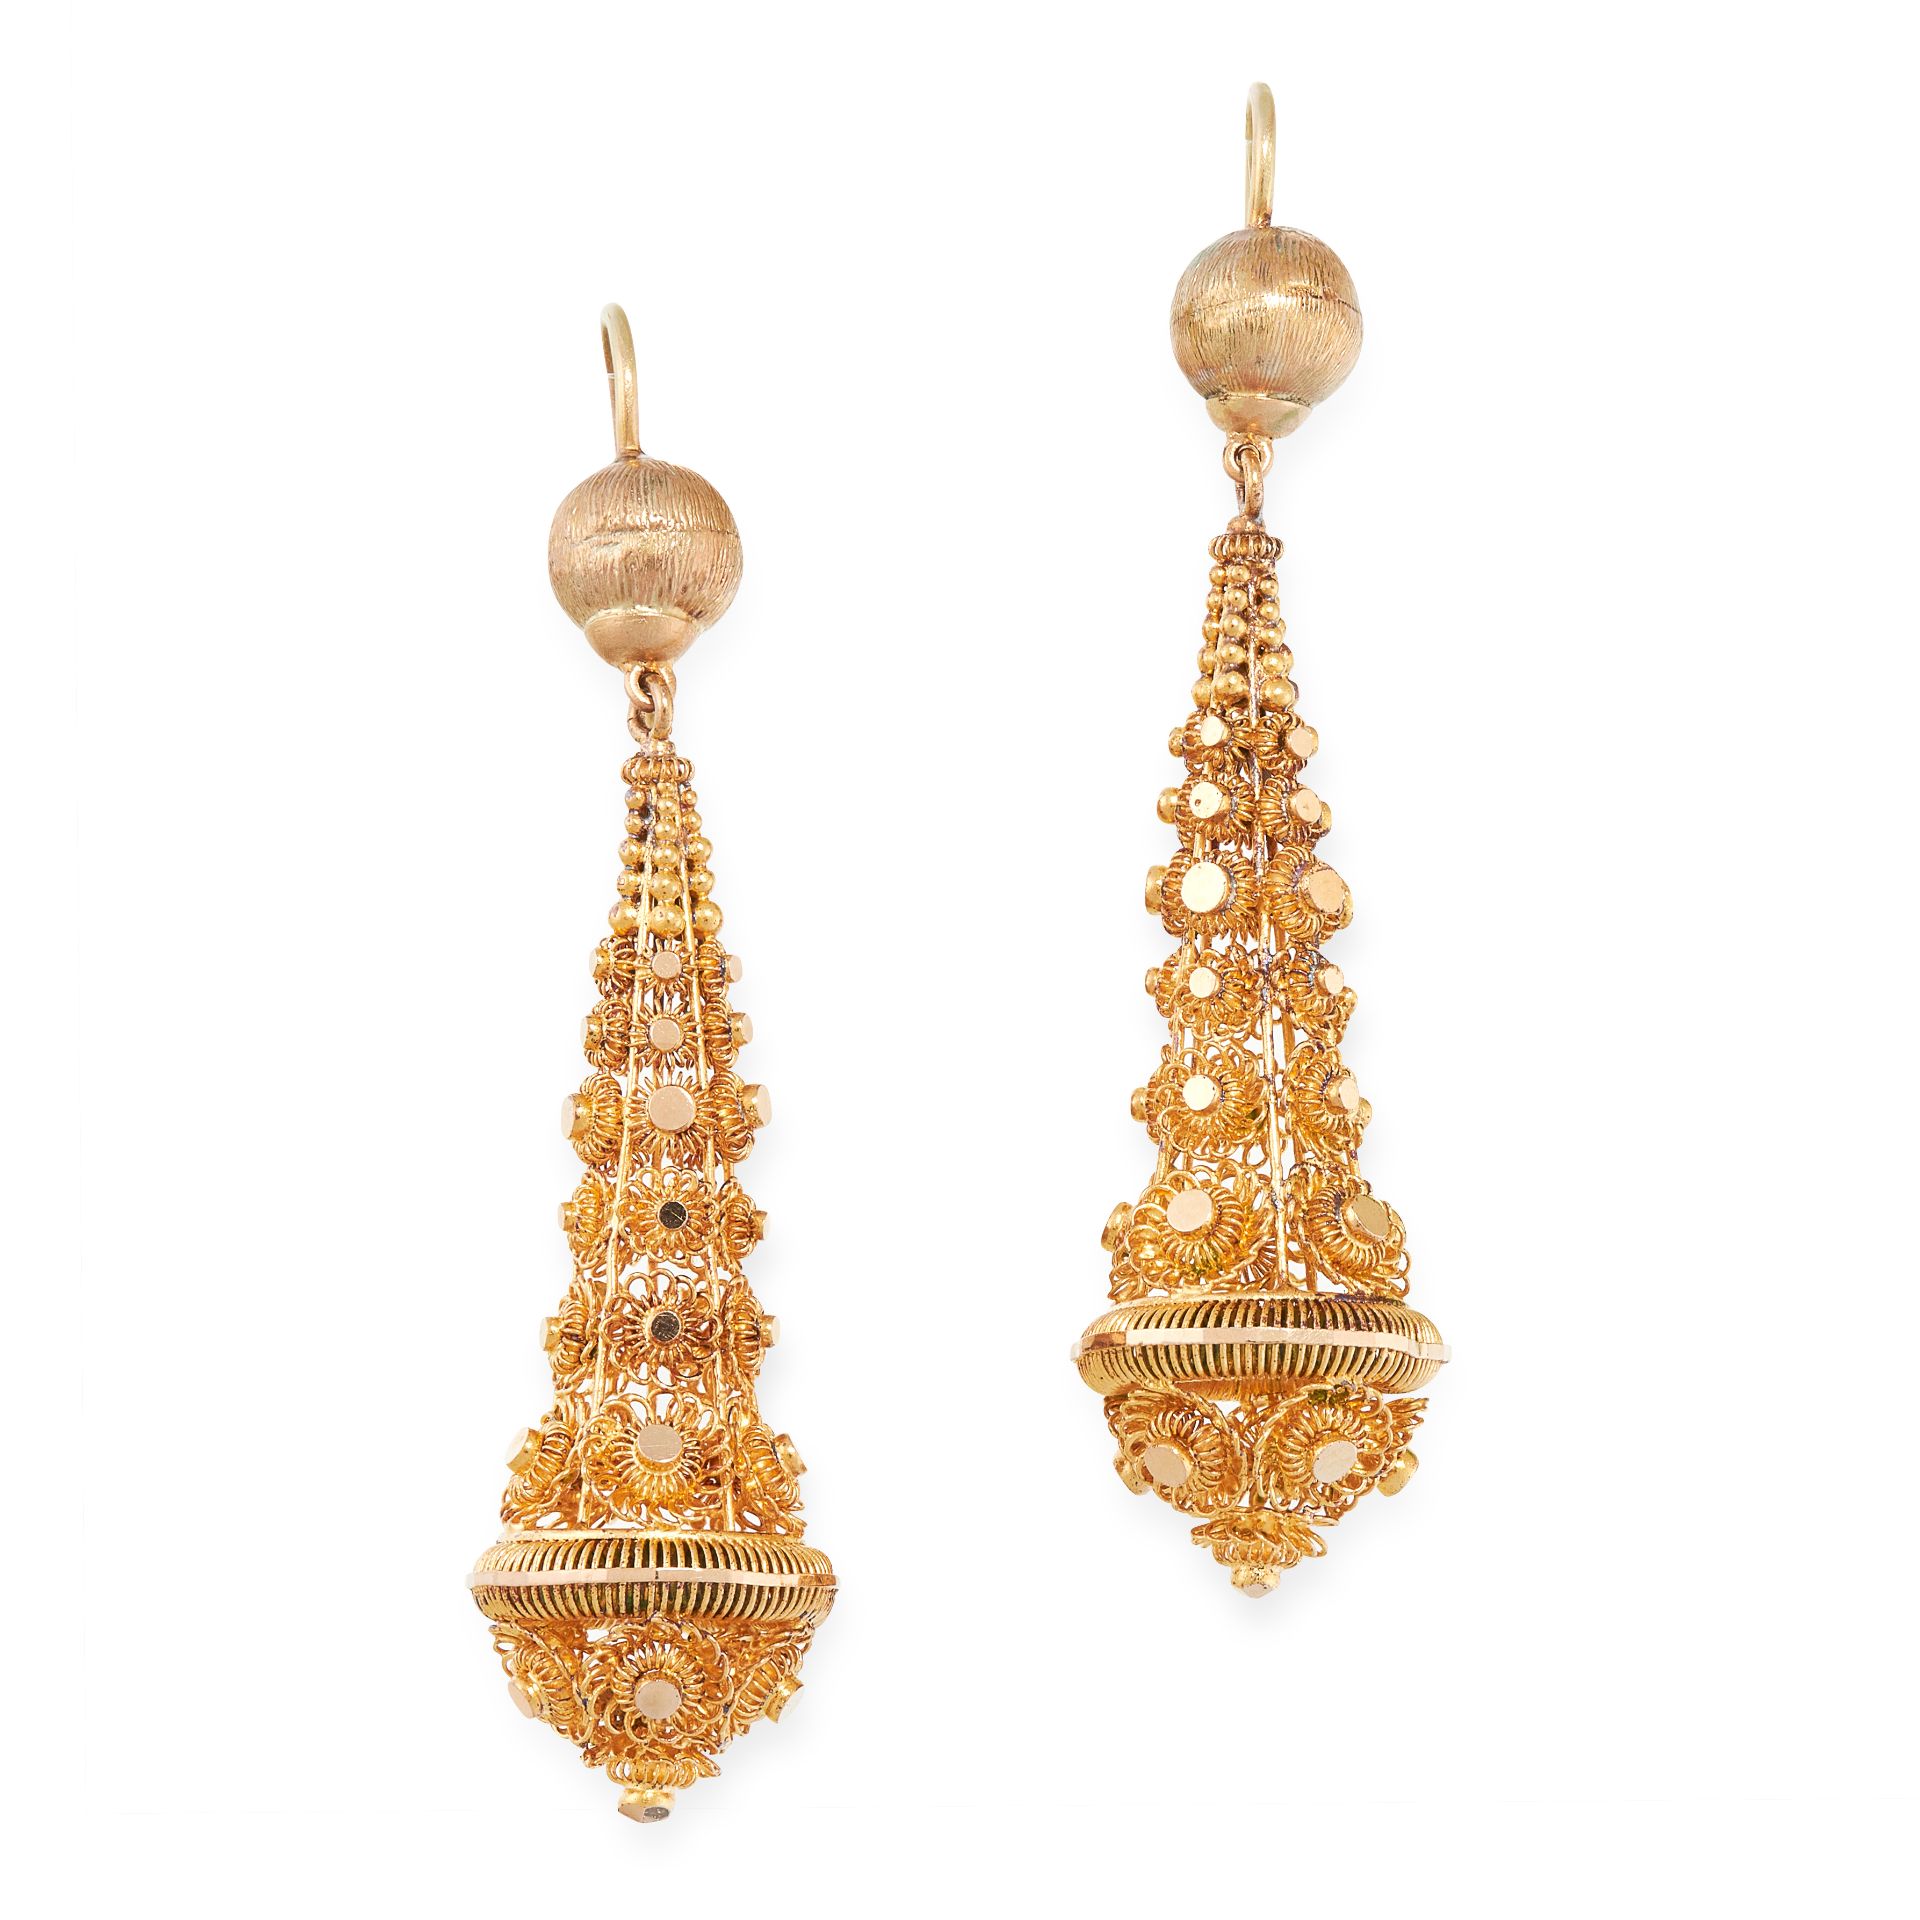 A PAIR OF ANTIQUE DROP EARRINGS, 19TH CENTURY in high carat yellow gold, the tapering articulated